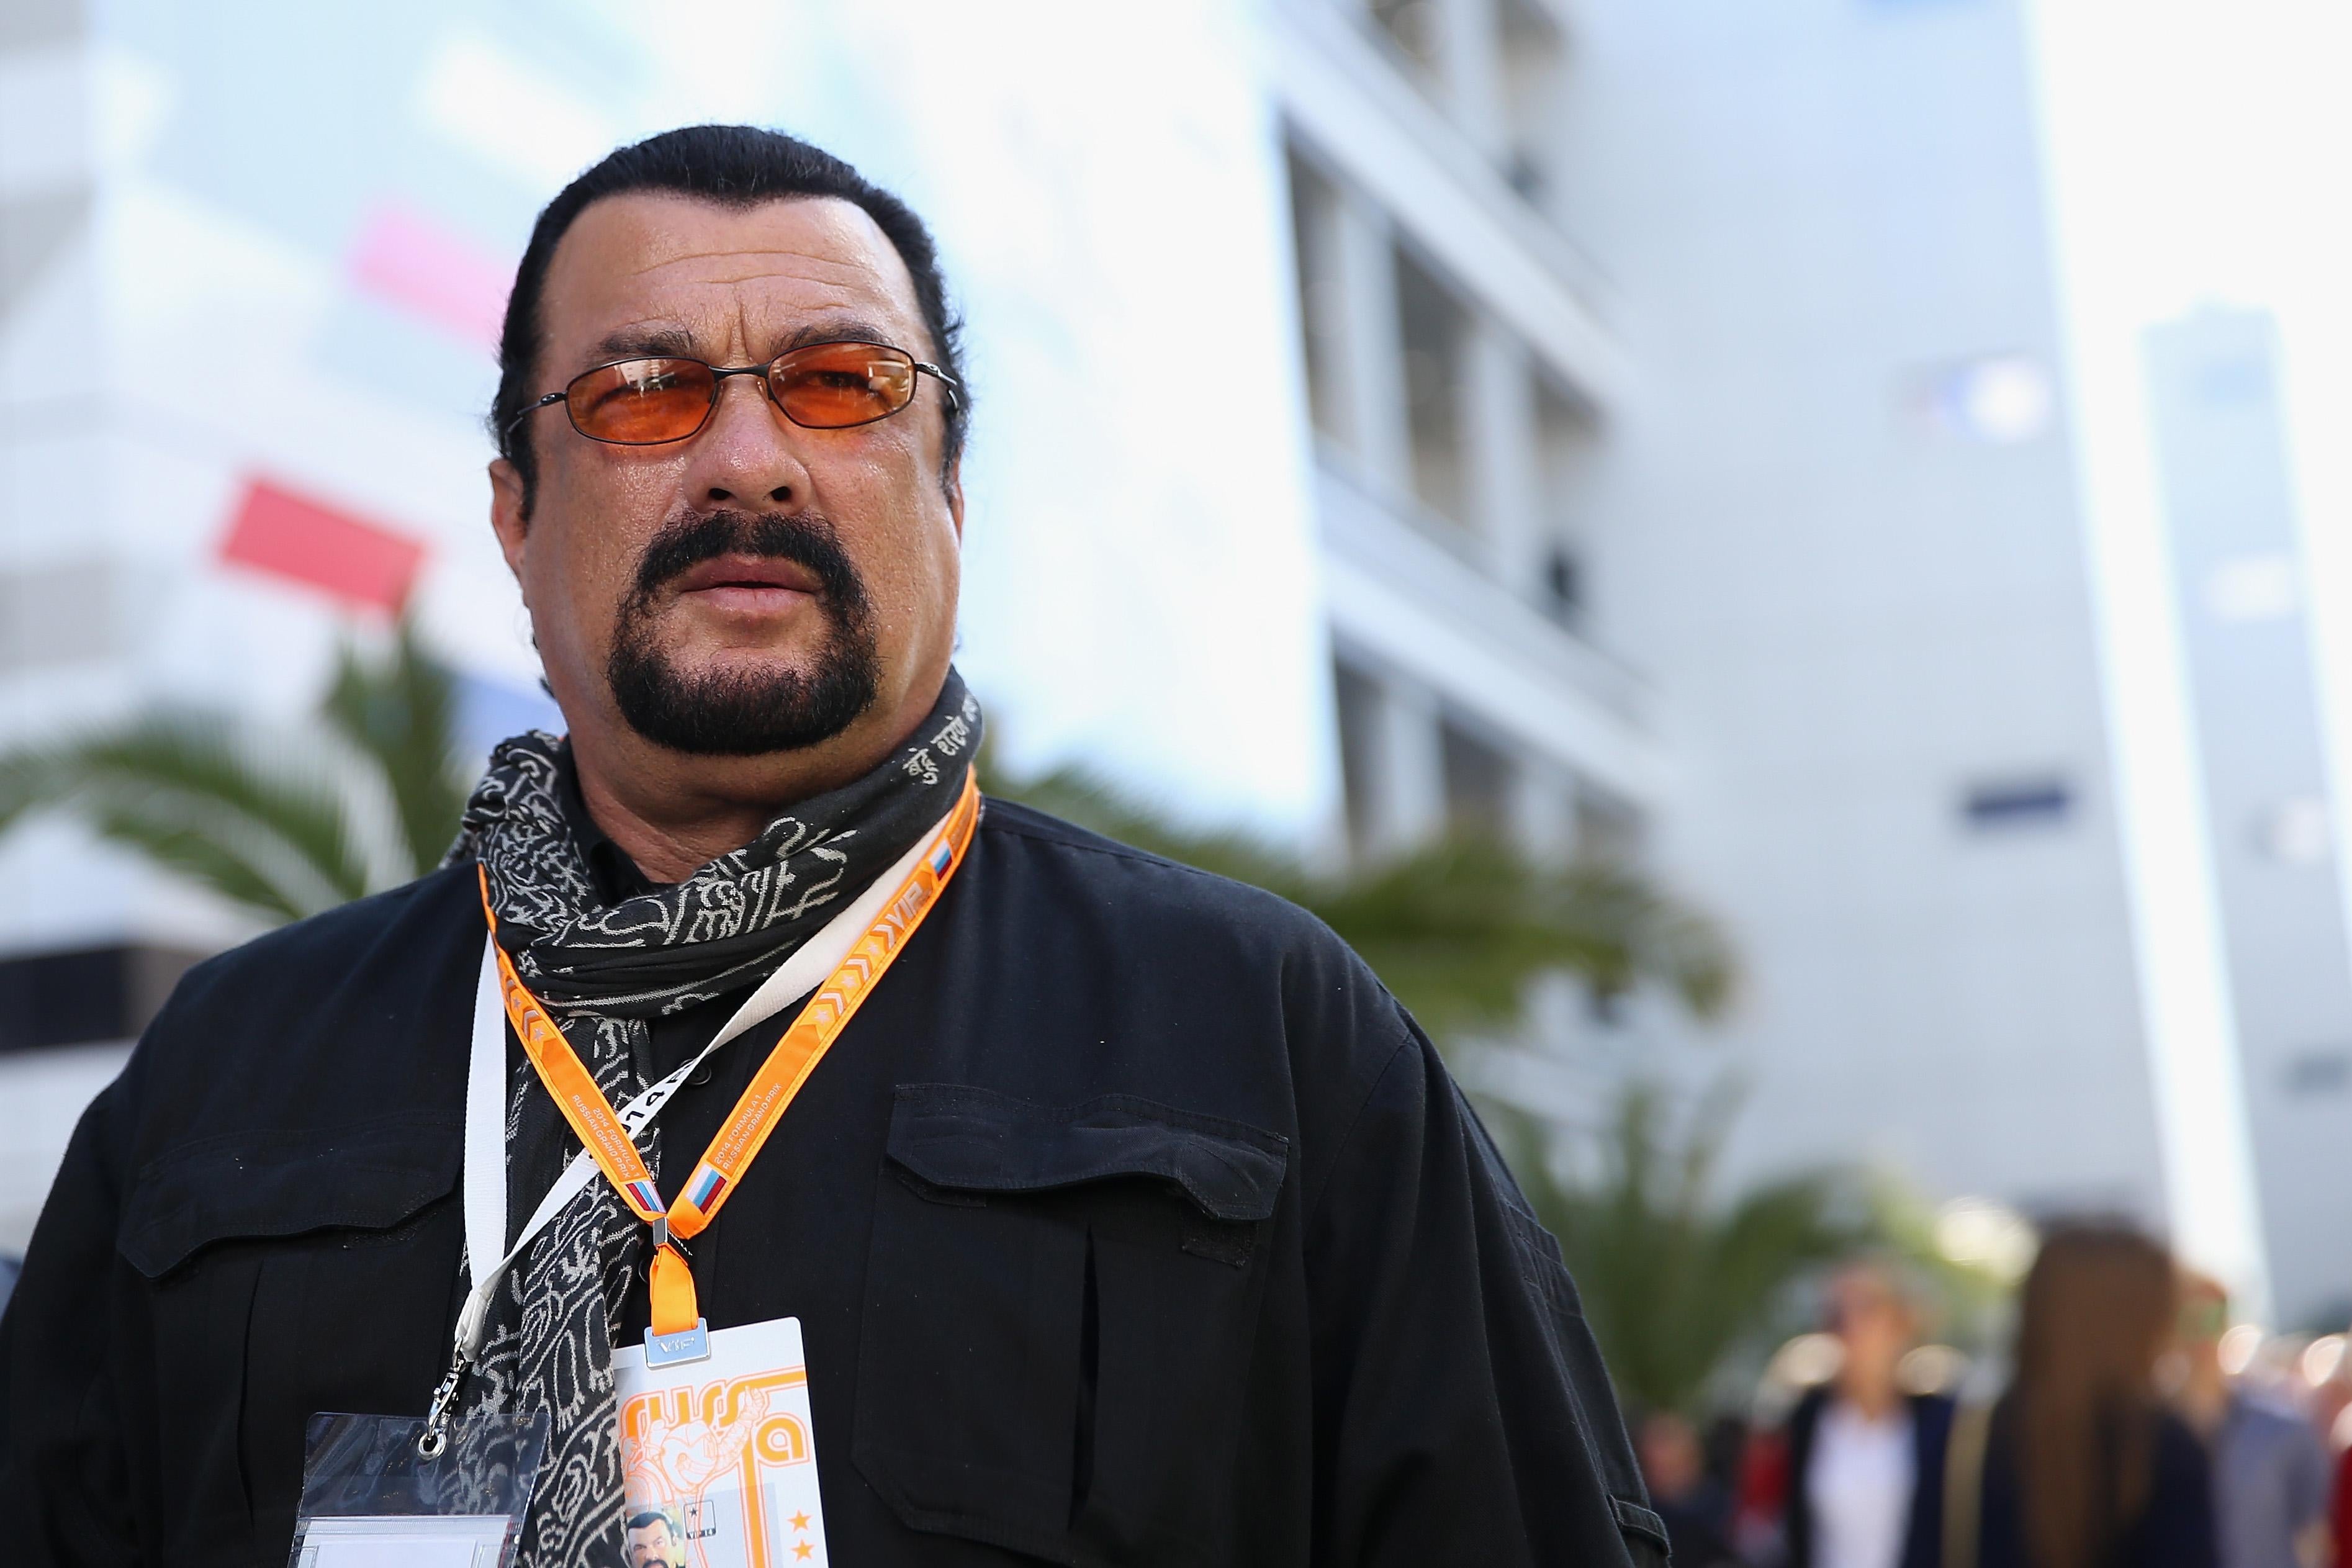 SOCHI, RUSSIA - OCTOBER 11:  Actor Steven Seagal  attends qualifying ahead of the Russian Formula One Grand Prix at Sochi Autodrom on October 11, 2014 in Sochi, Russia.  (Photo by Clive Mason/Getty Images)